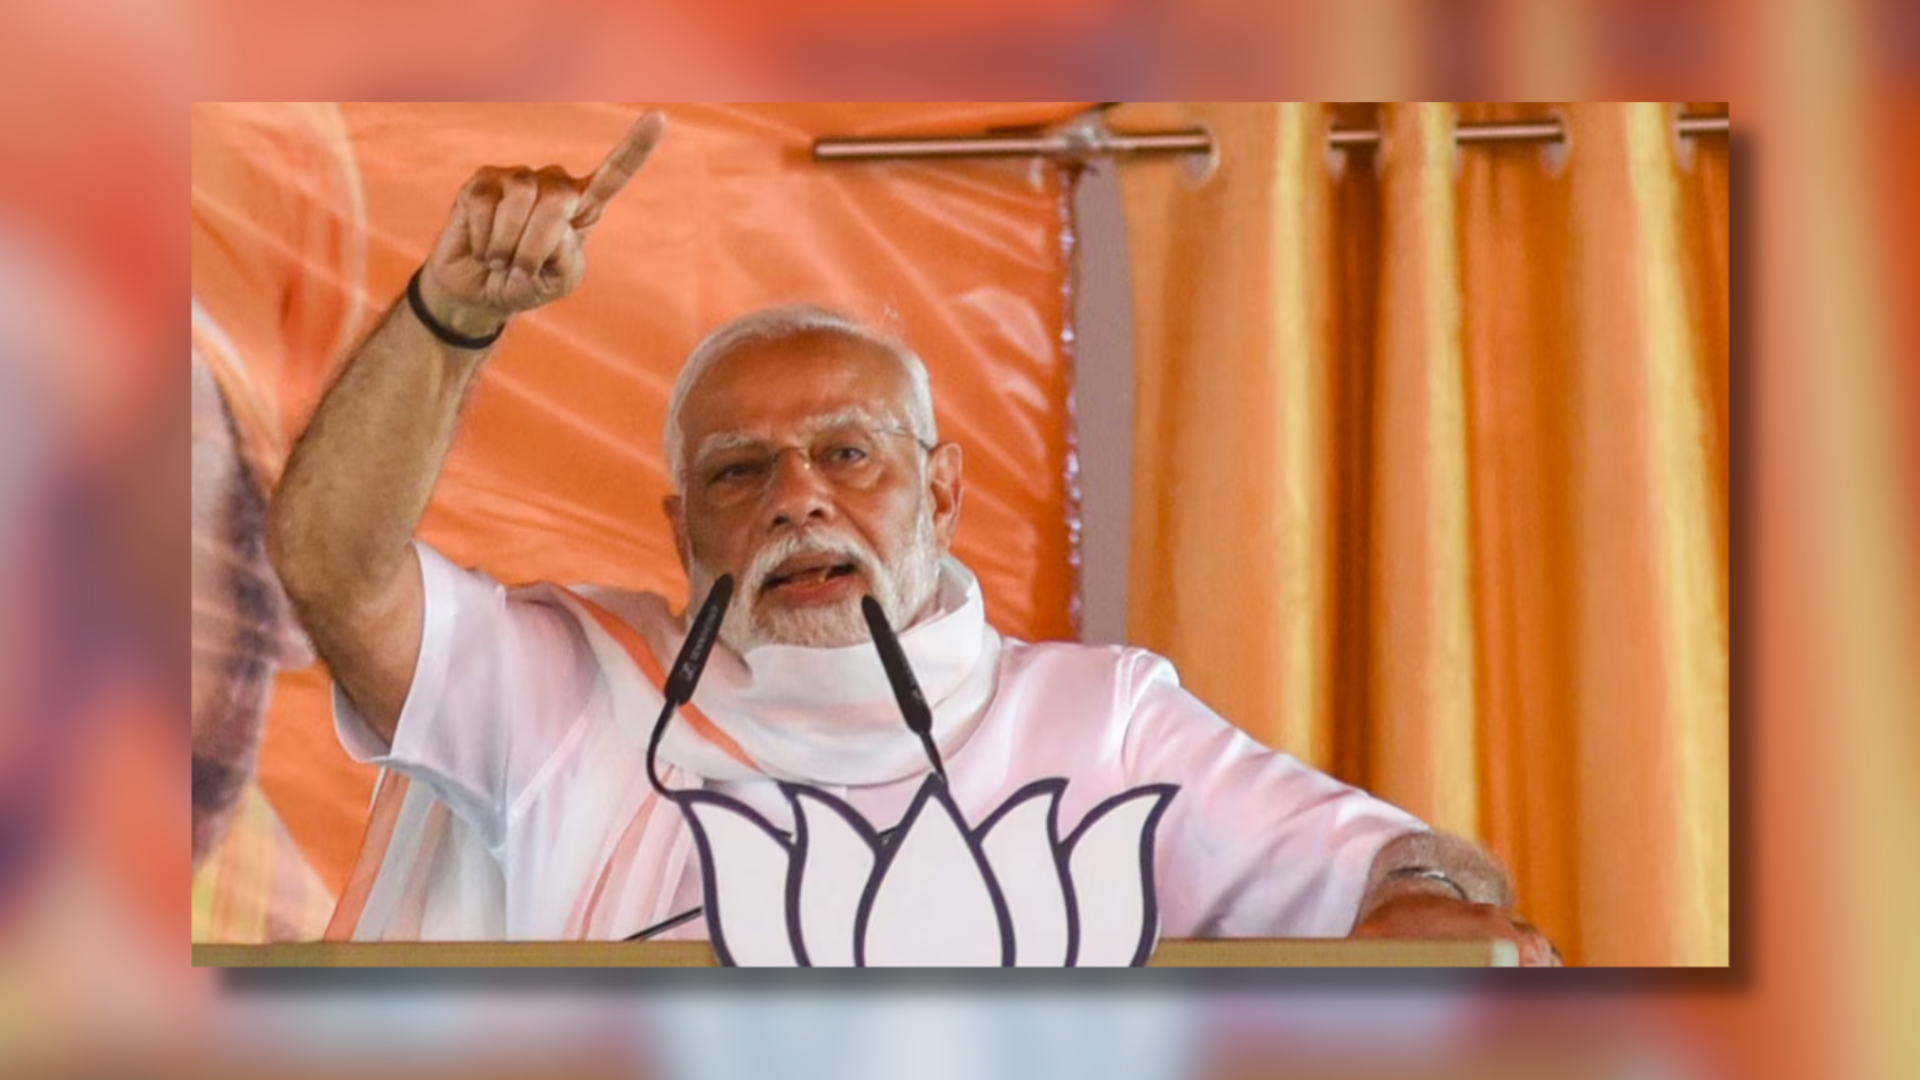 PM Modi Takes Aim At Opposition: “I Say Remove Corruption, They Say Save Corrupt Leaders”